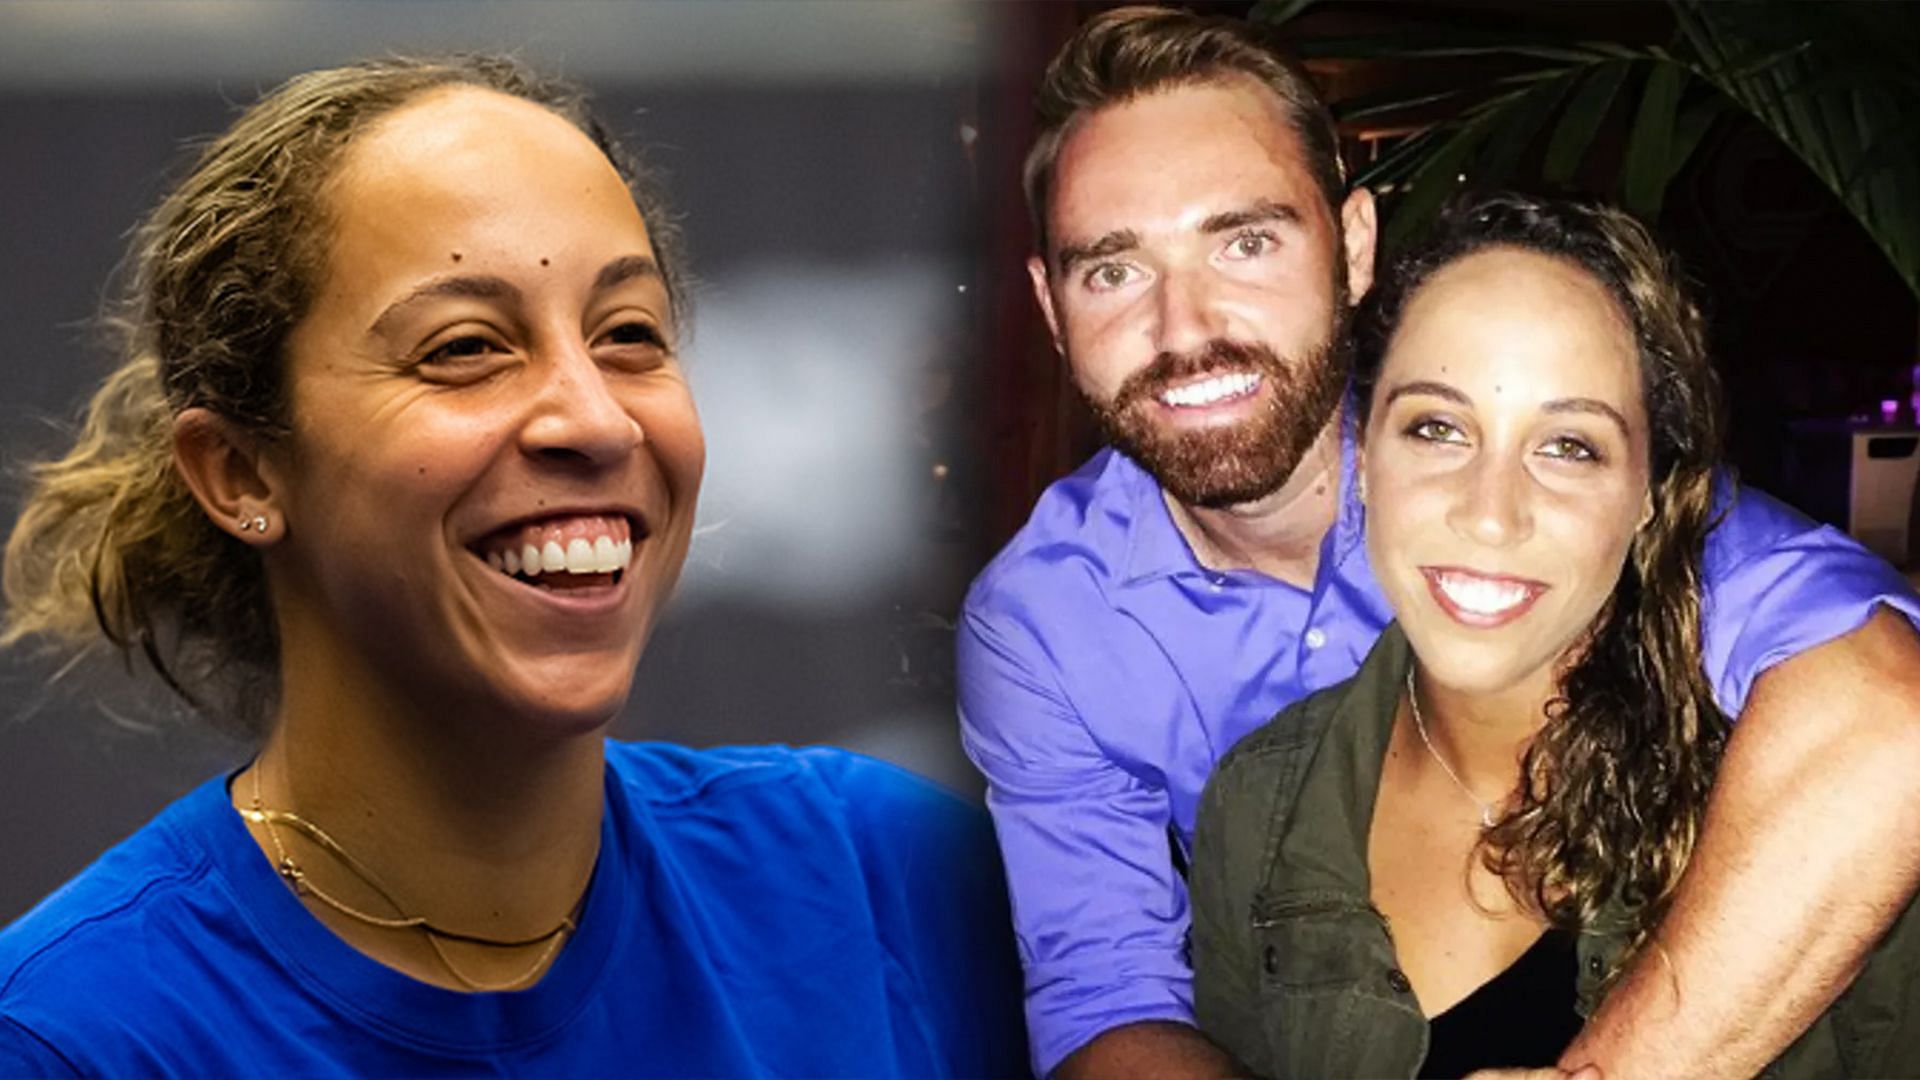 Madison Keys opens up about surprise proposal from fianc&eacute; Bjorn Fratangelo